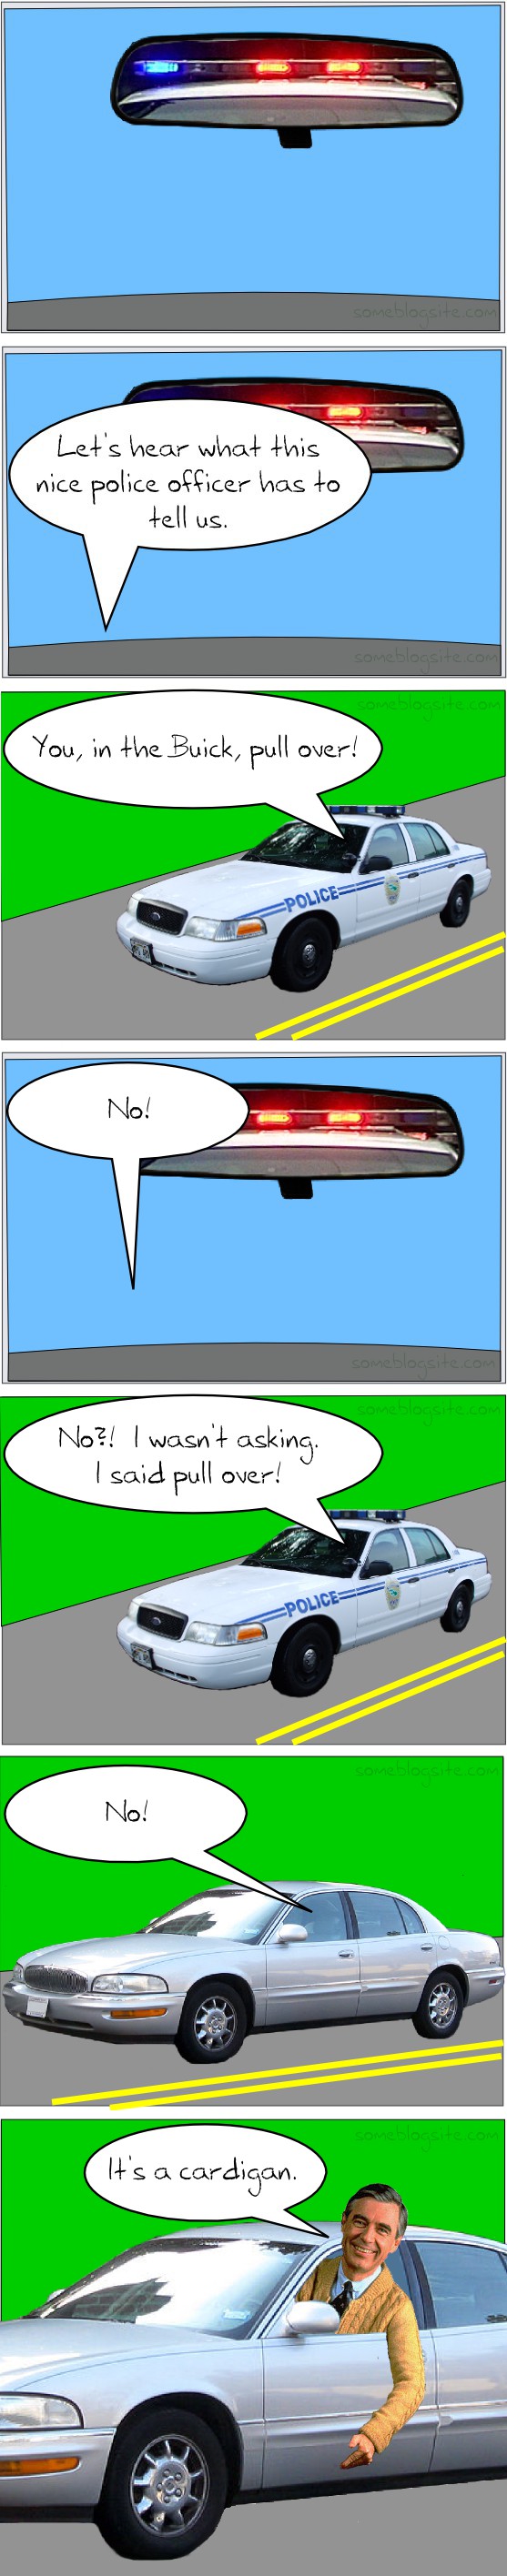 comic of a police officer trying to pull over Mr. Rogers